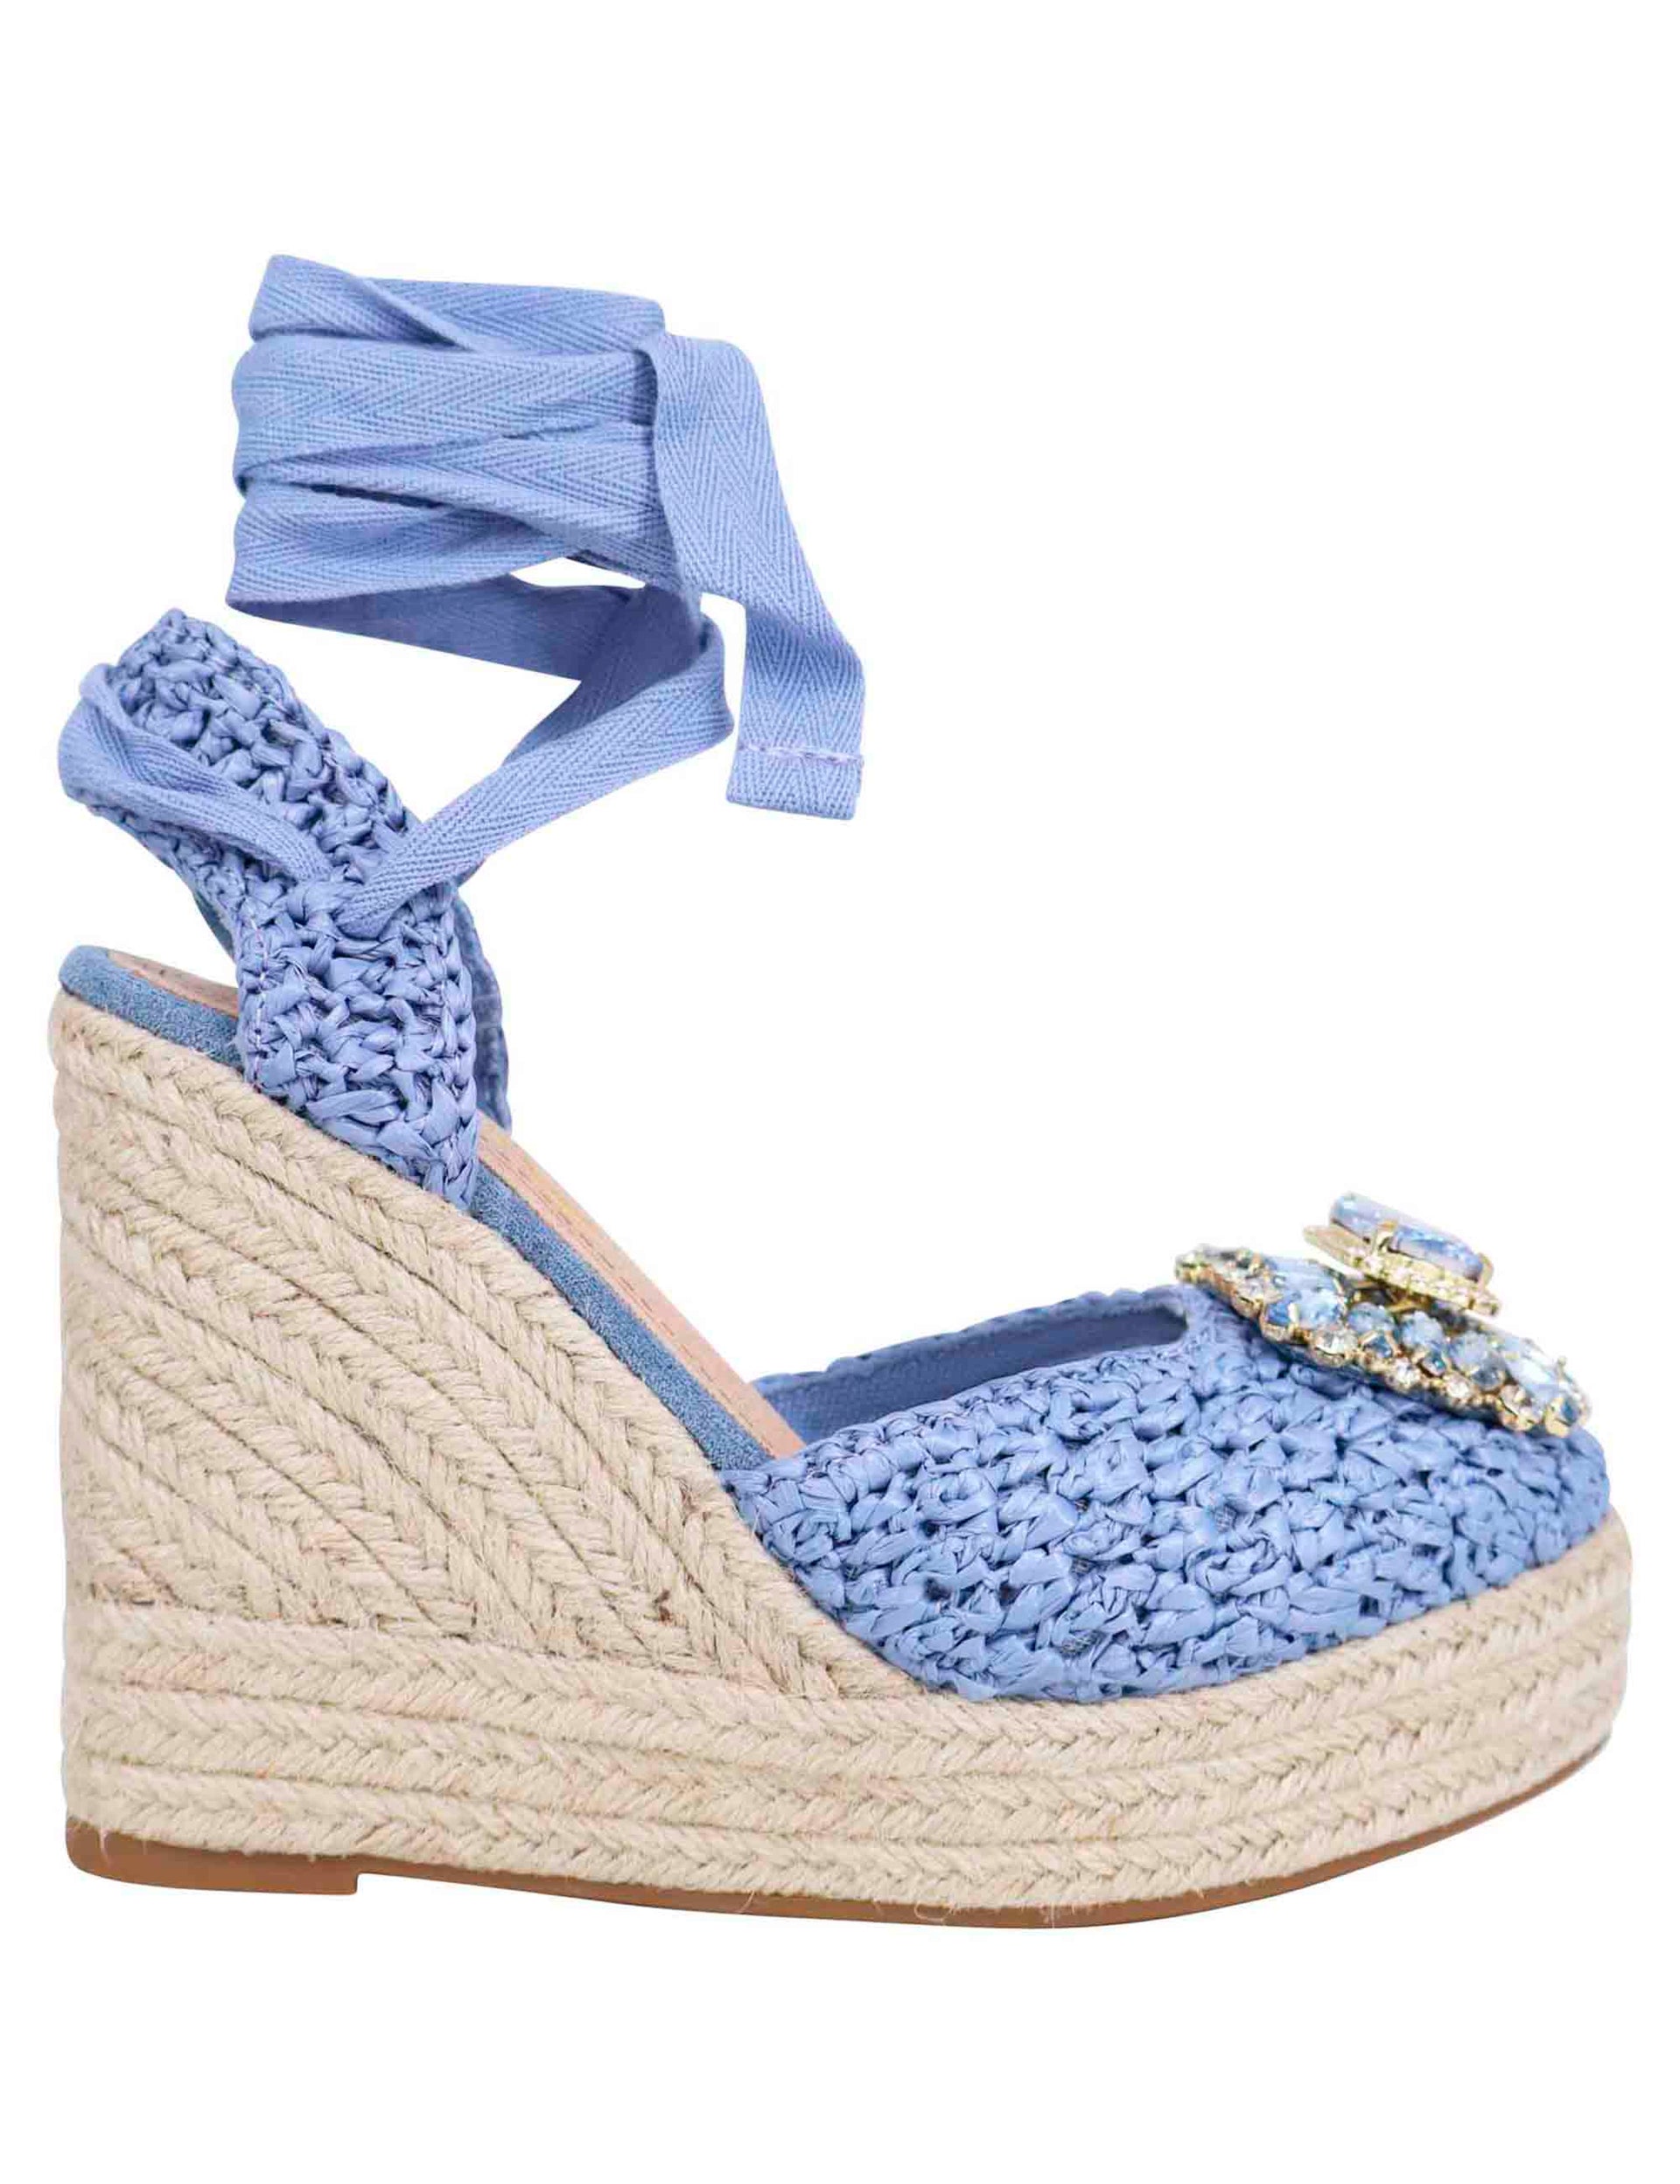 Women's espadrilles sandals in light blue fabric, buckle with matching stones and high rope wedge